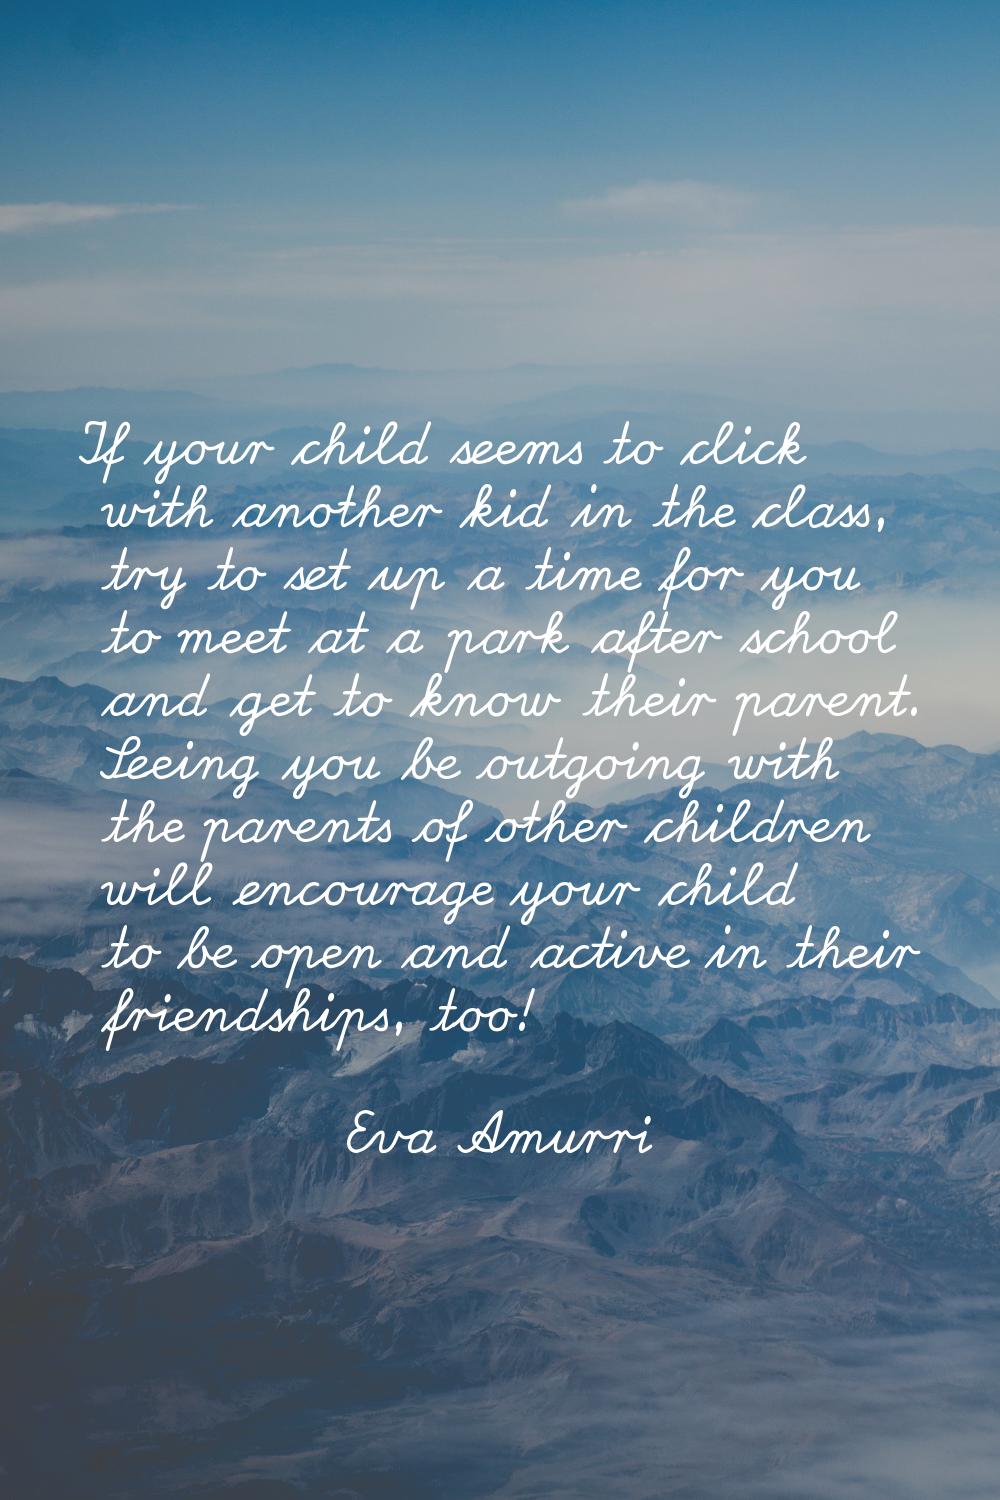 If your child seems to click with another kid in the class, try to set up a time for you to meet at